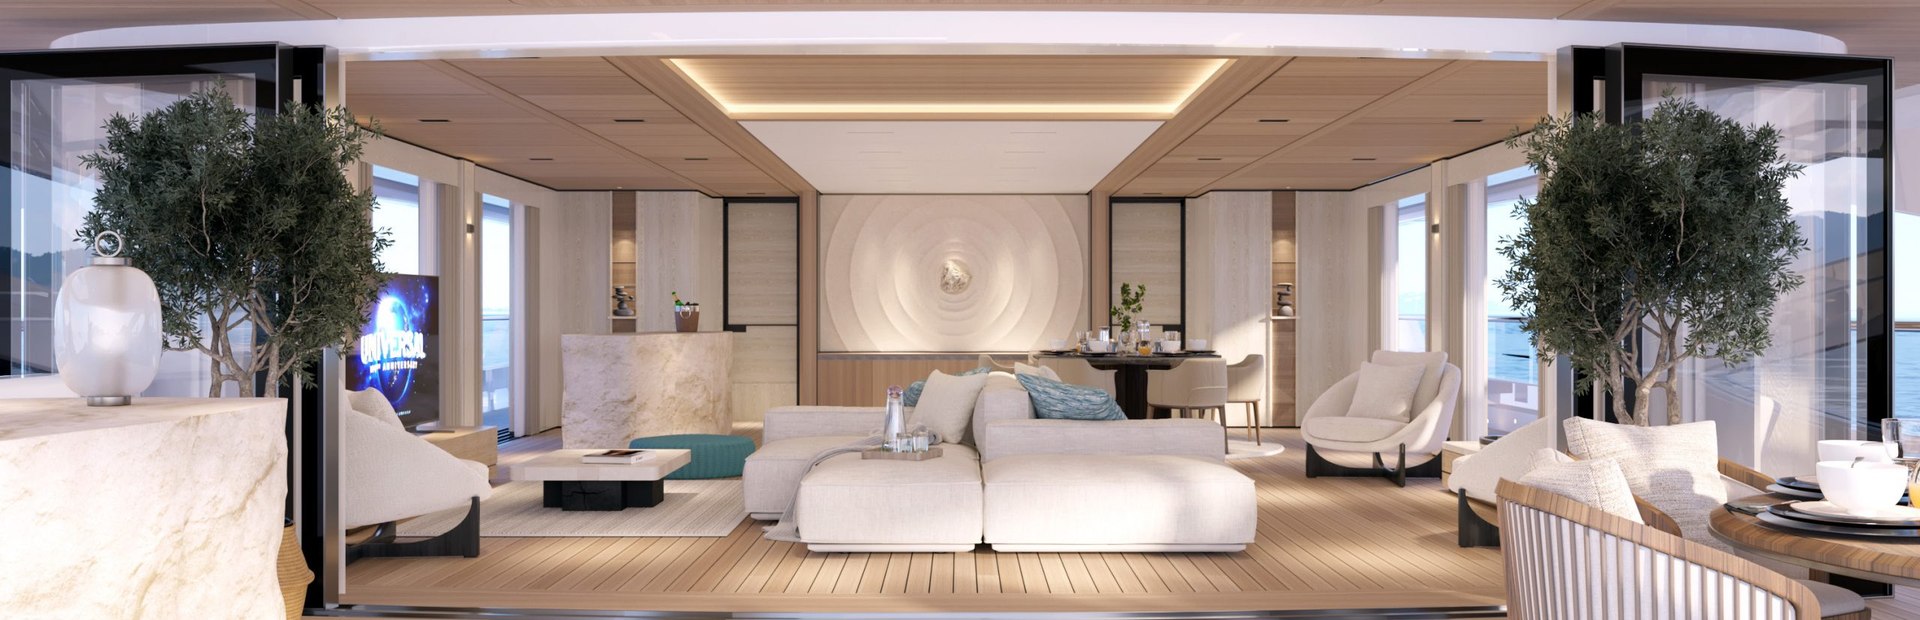 B.Now 66M Oasis Yacht